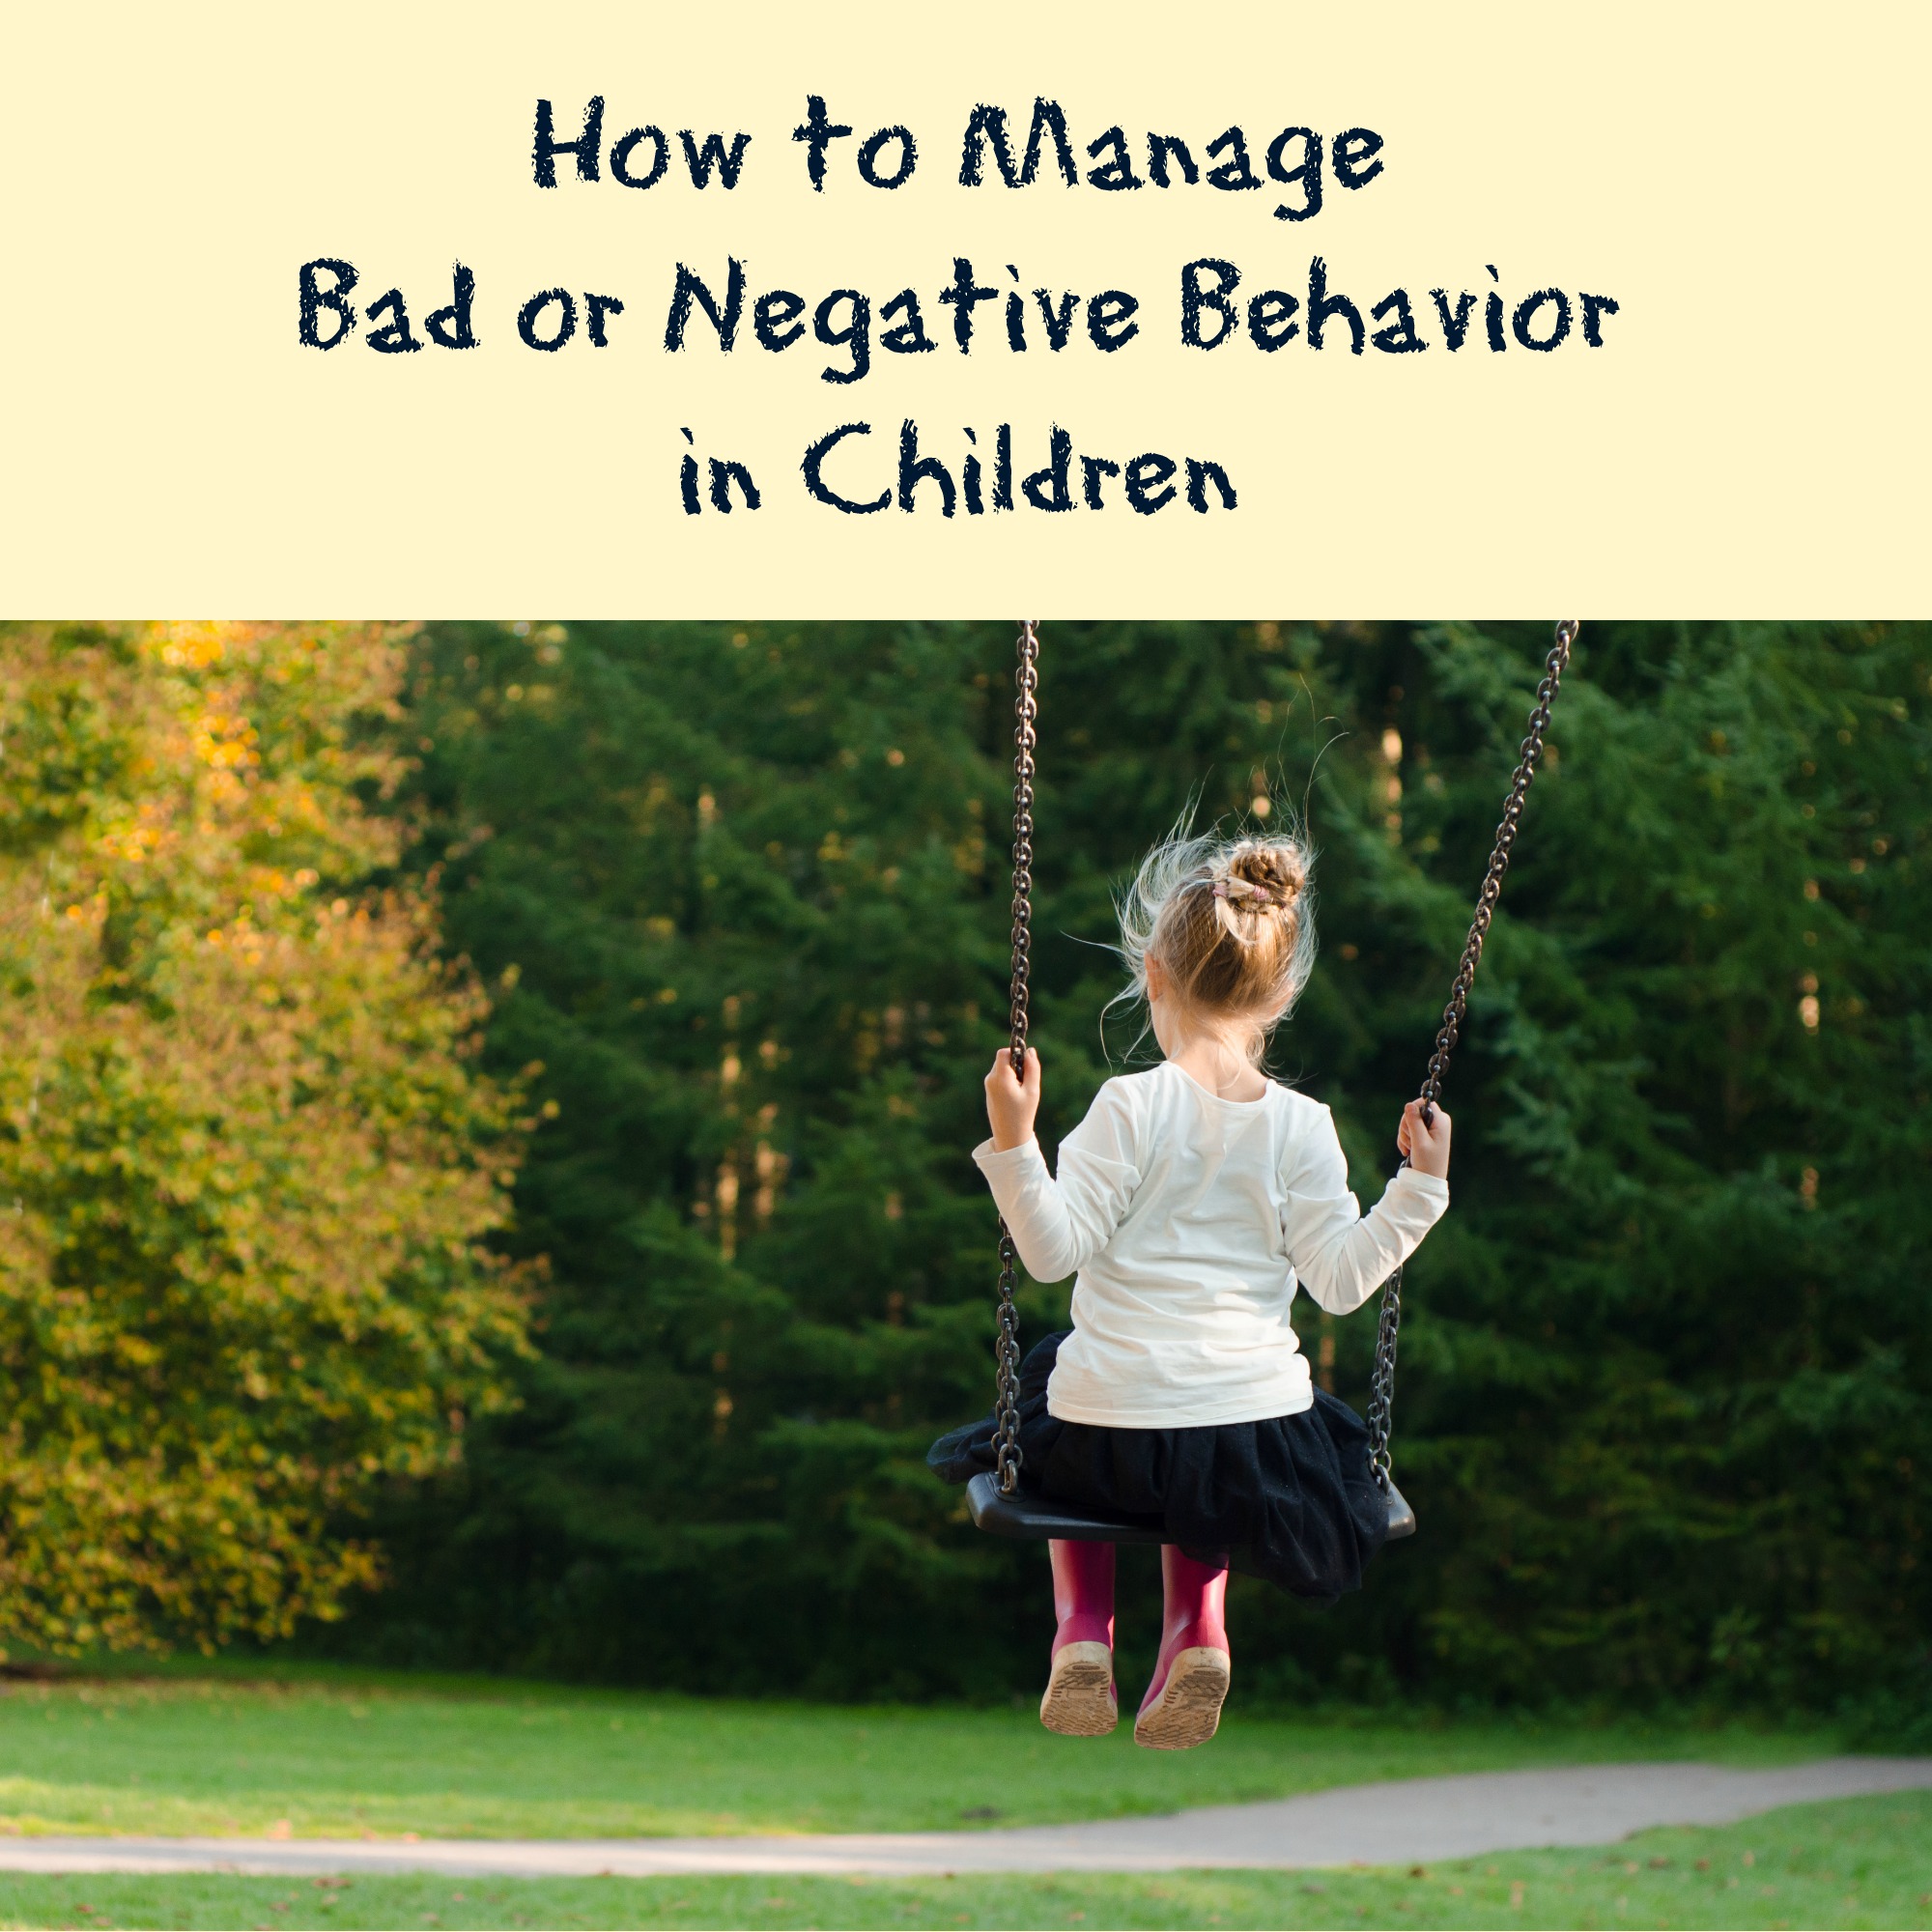 How to Manage Bad or Negative Behavior in Children